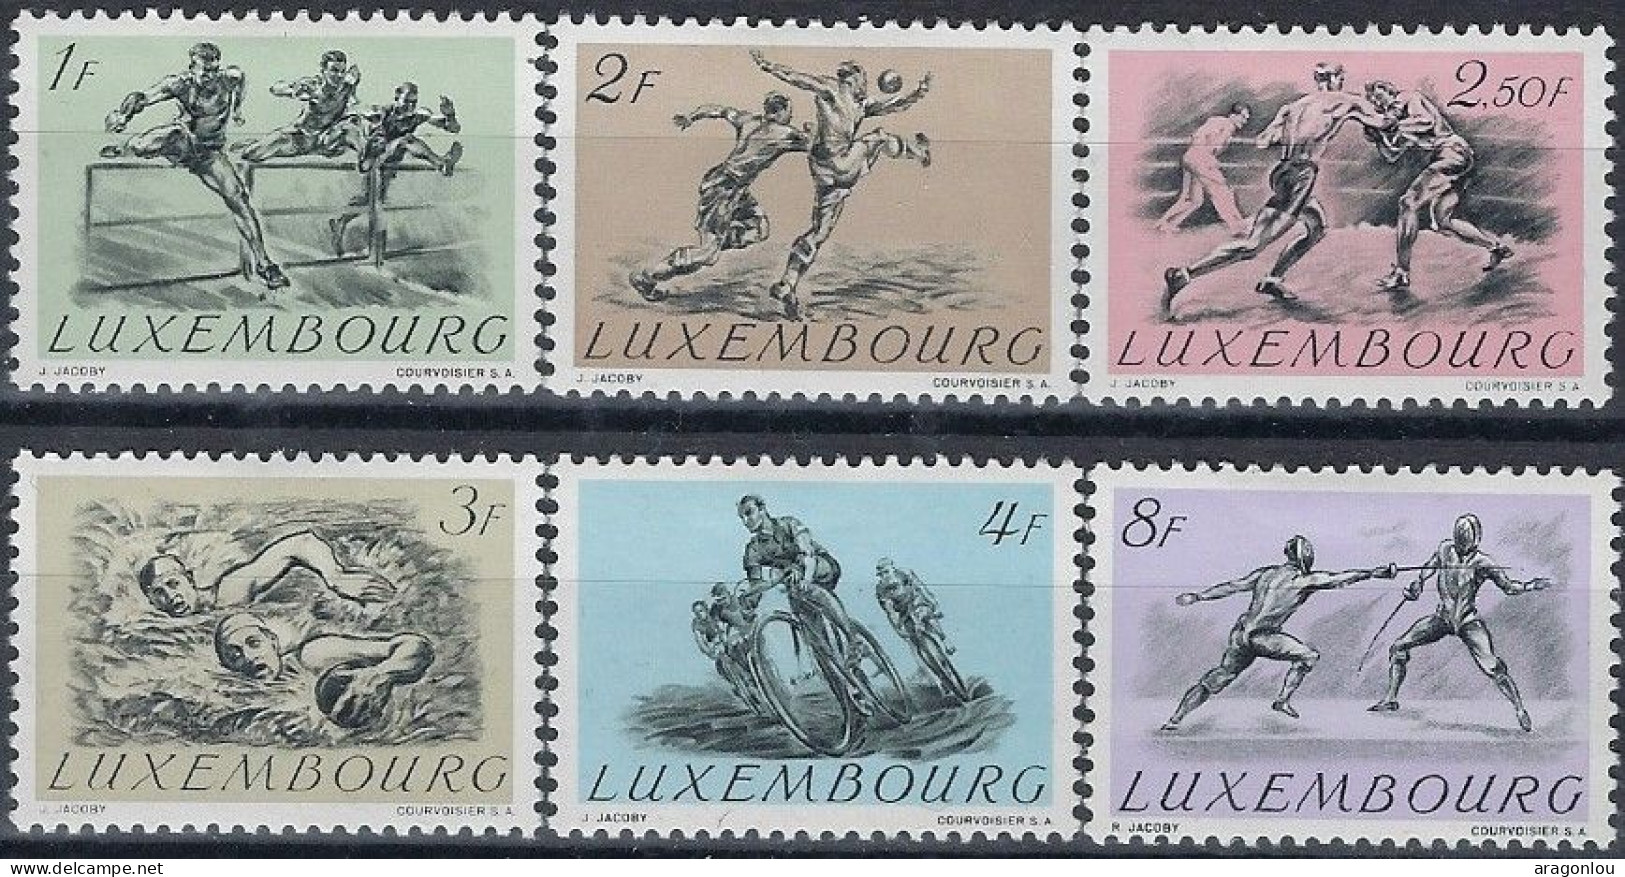 Luxembourg - Luxemburg -  Timbre   Série  Olympique   1952   VC. 50,-   * - Used Stamps